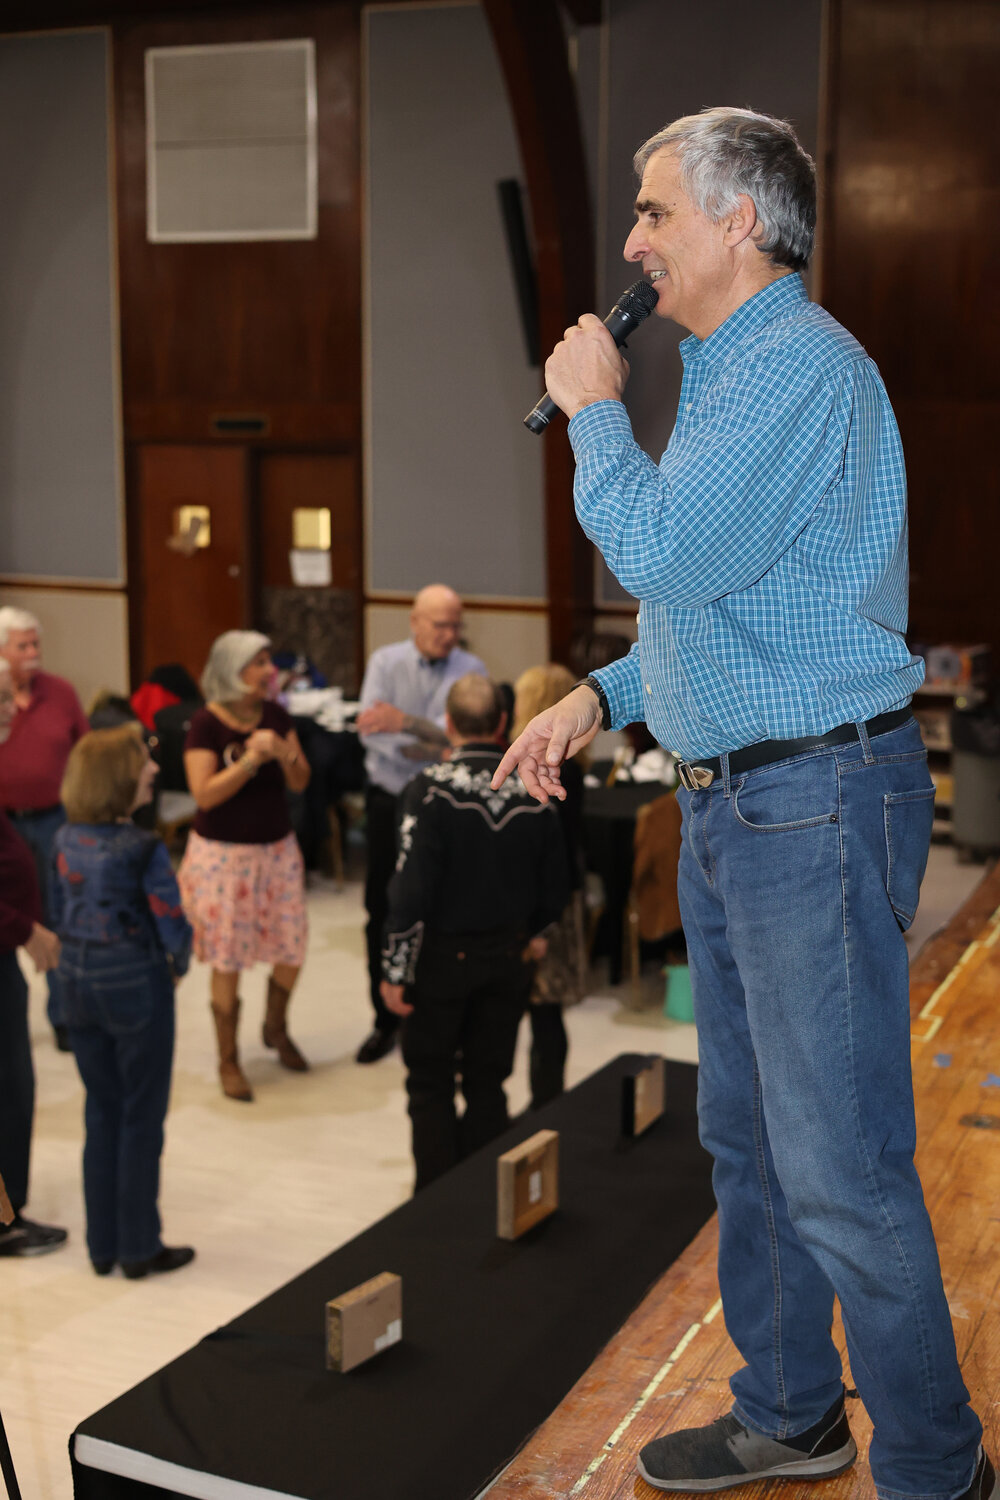 Mario Fiore, the square dance caller at the event, speaks onstage to the dancing crowd. Fiore is the son of Primo Fiore, who famously taught square dancing at the Jones Beach Bandshell.